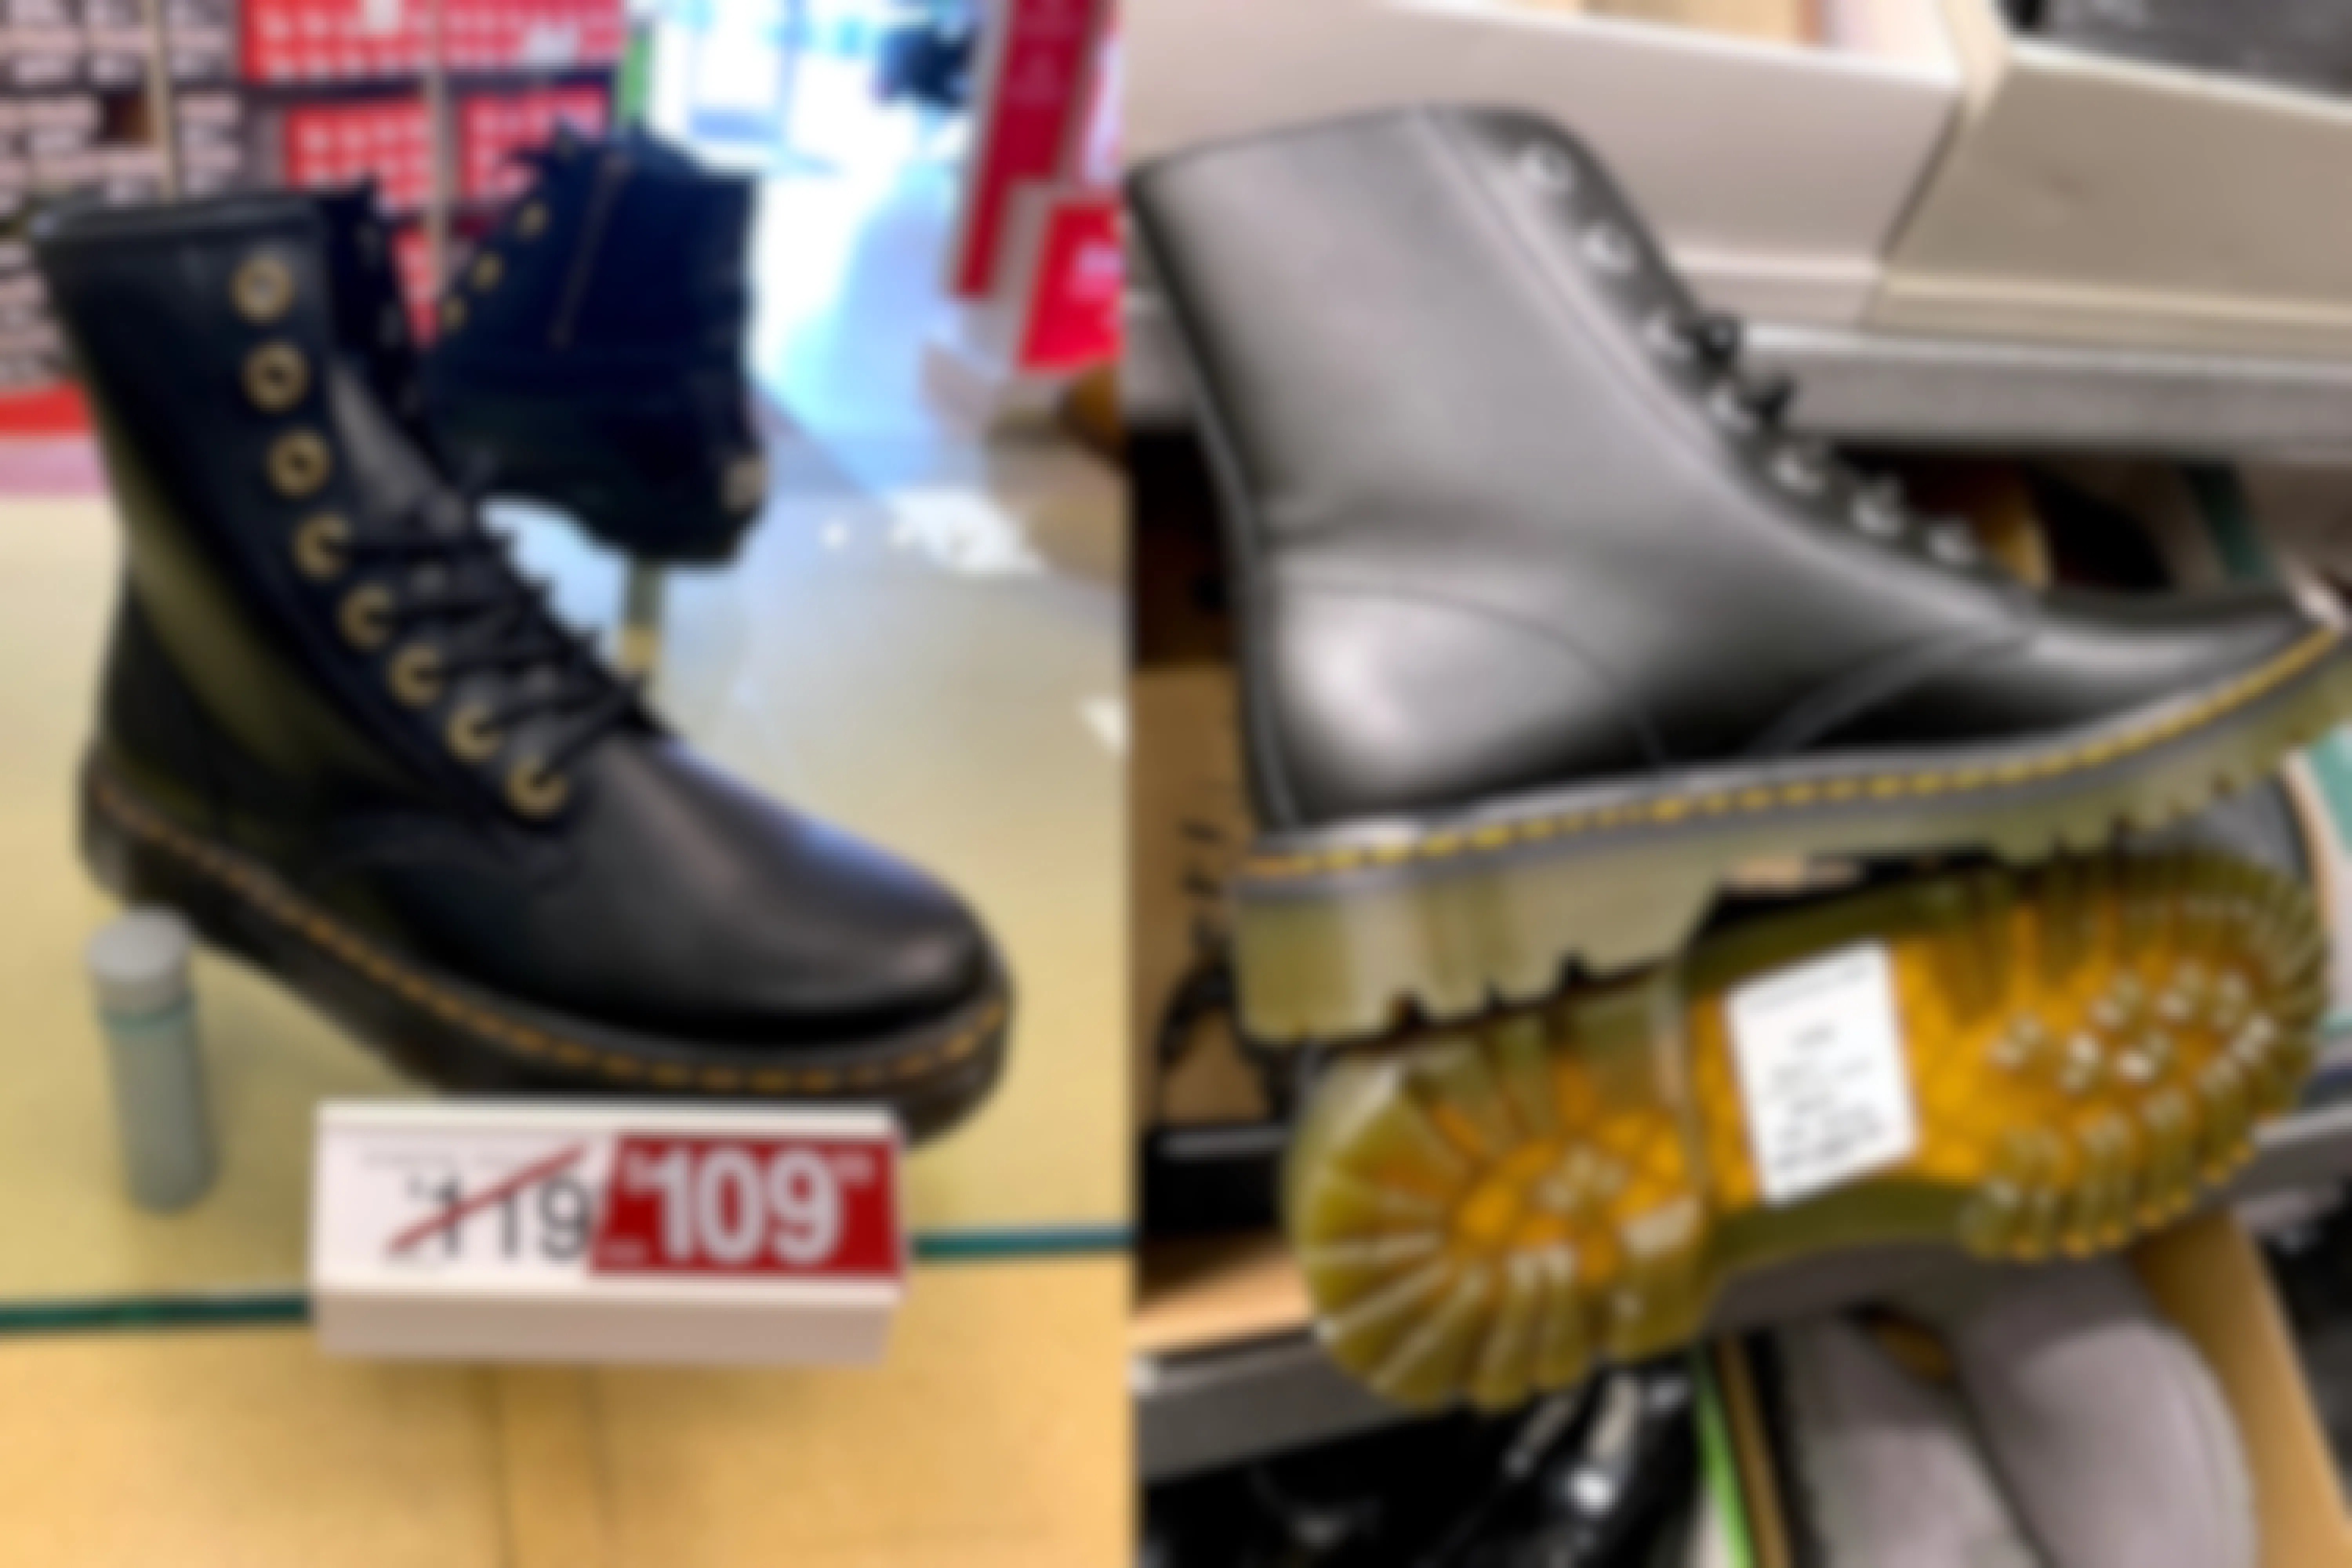 Two photos of Doc Martin shoes side by side showing the price comparison and it is cheaper at Nordstrom Rack than at Famous Footwear